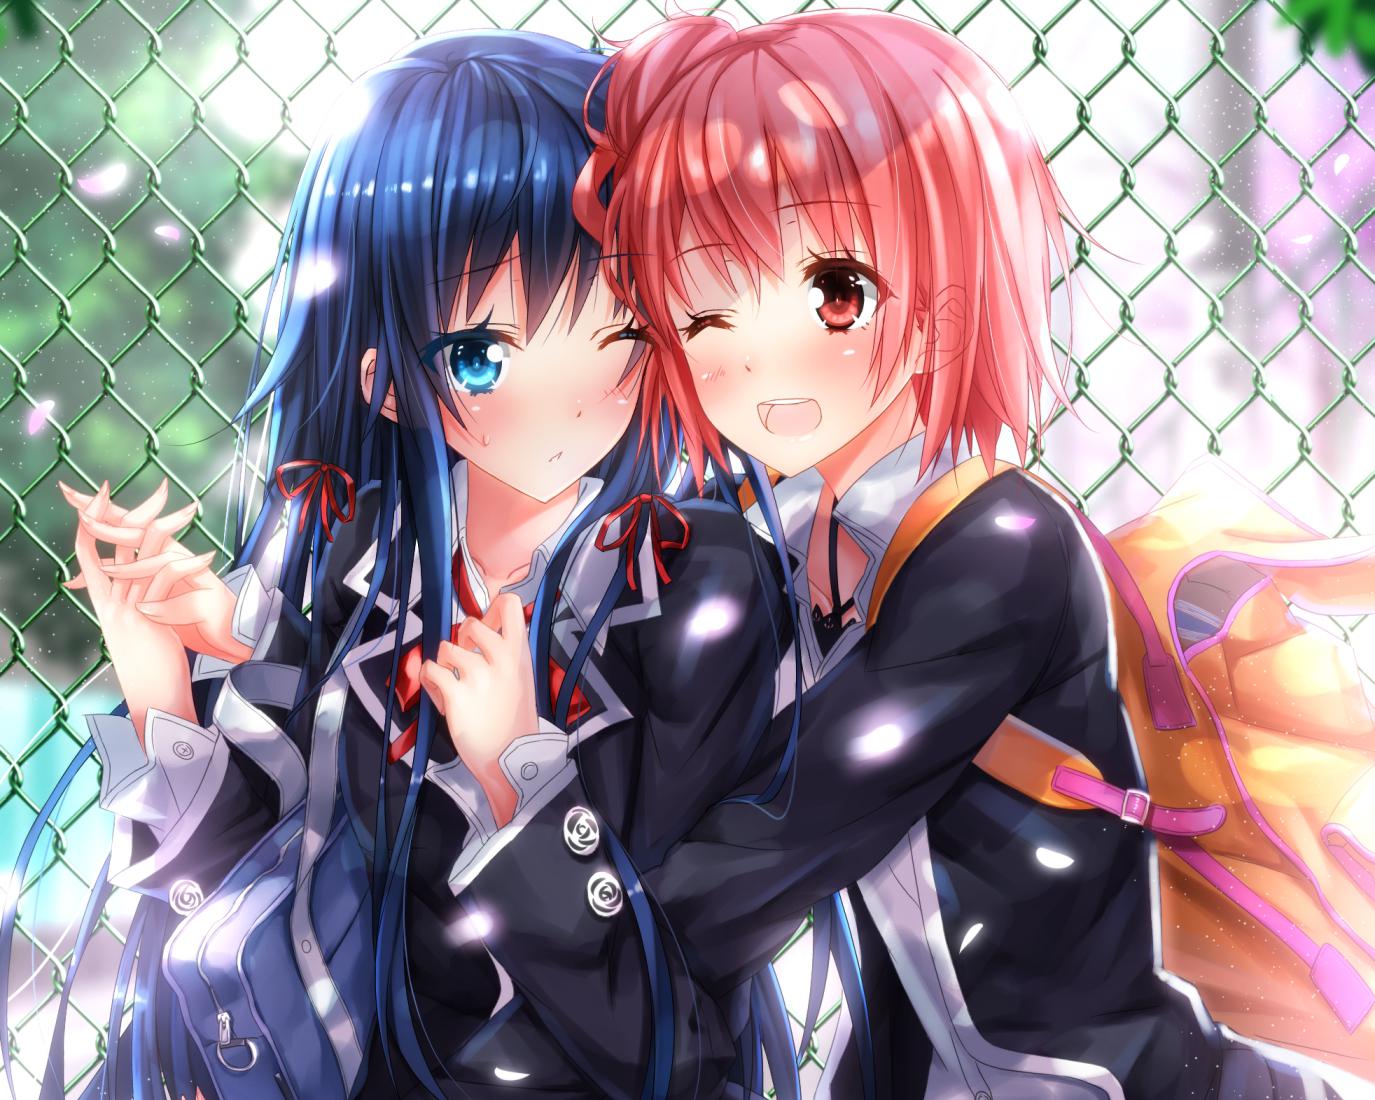 Anime Cute Friends Wallpapers Wallpaper Cave